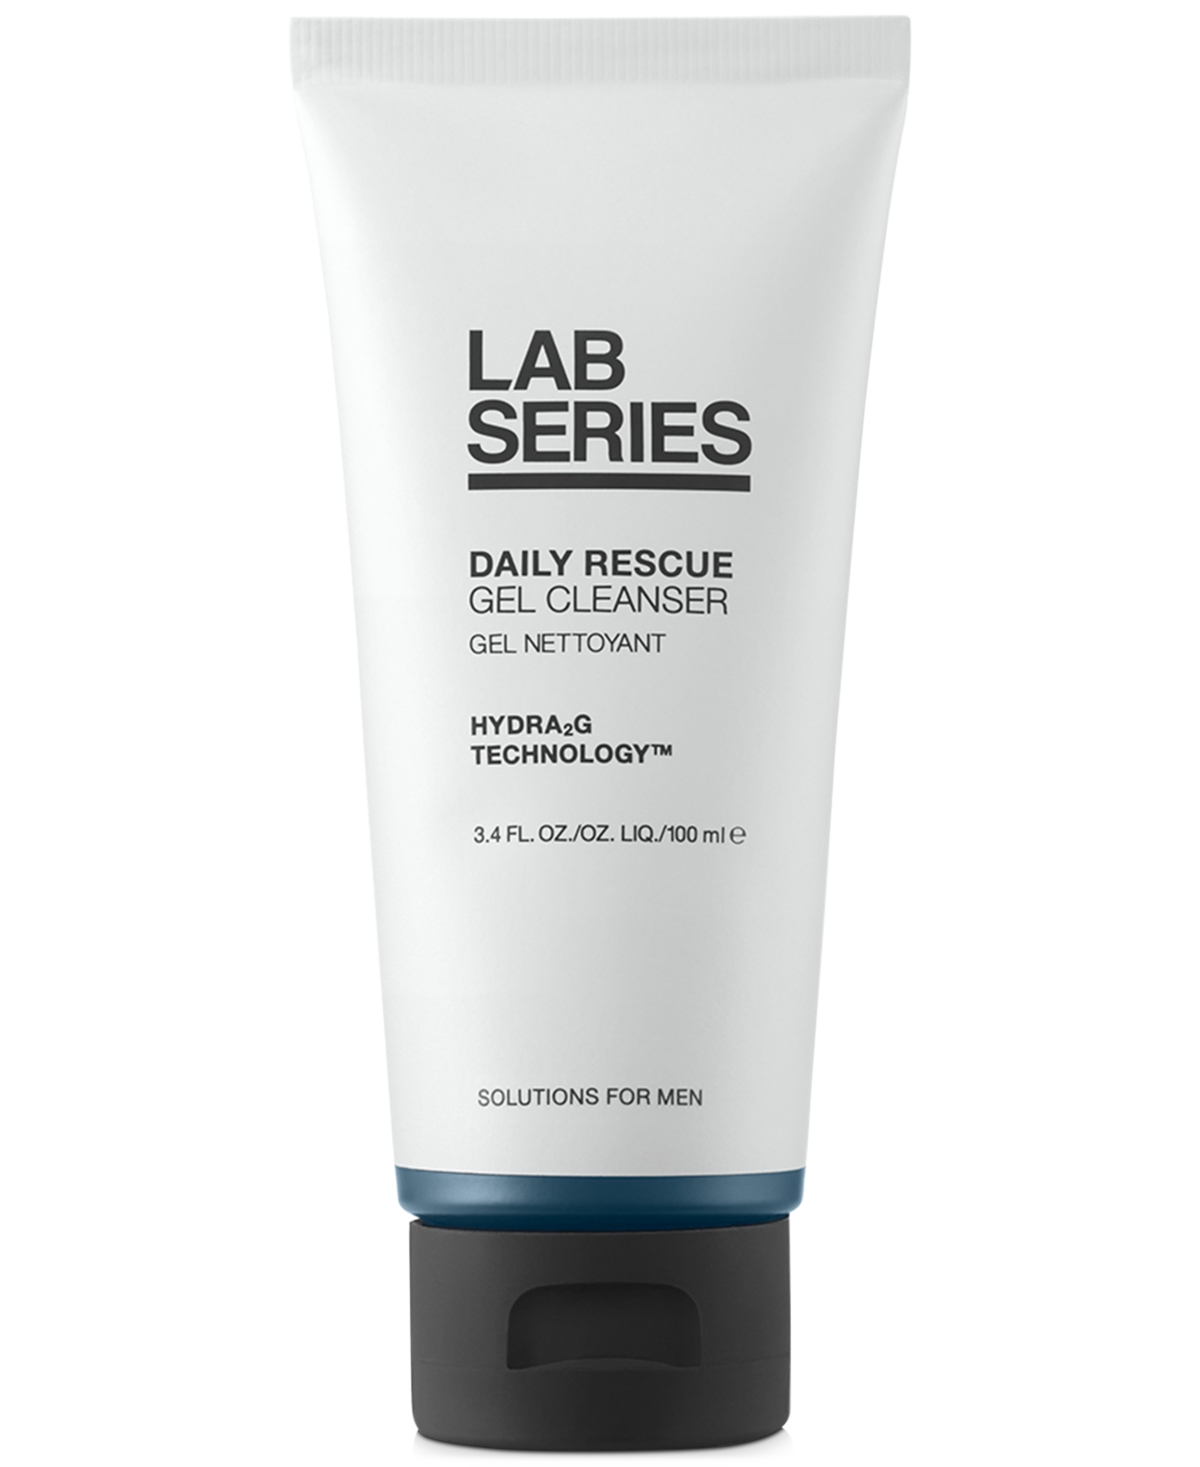 Skincare for Men Daily Rescue Gel Cleanser, 3.4 oz.